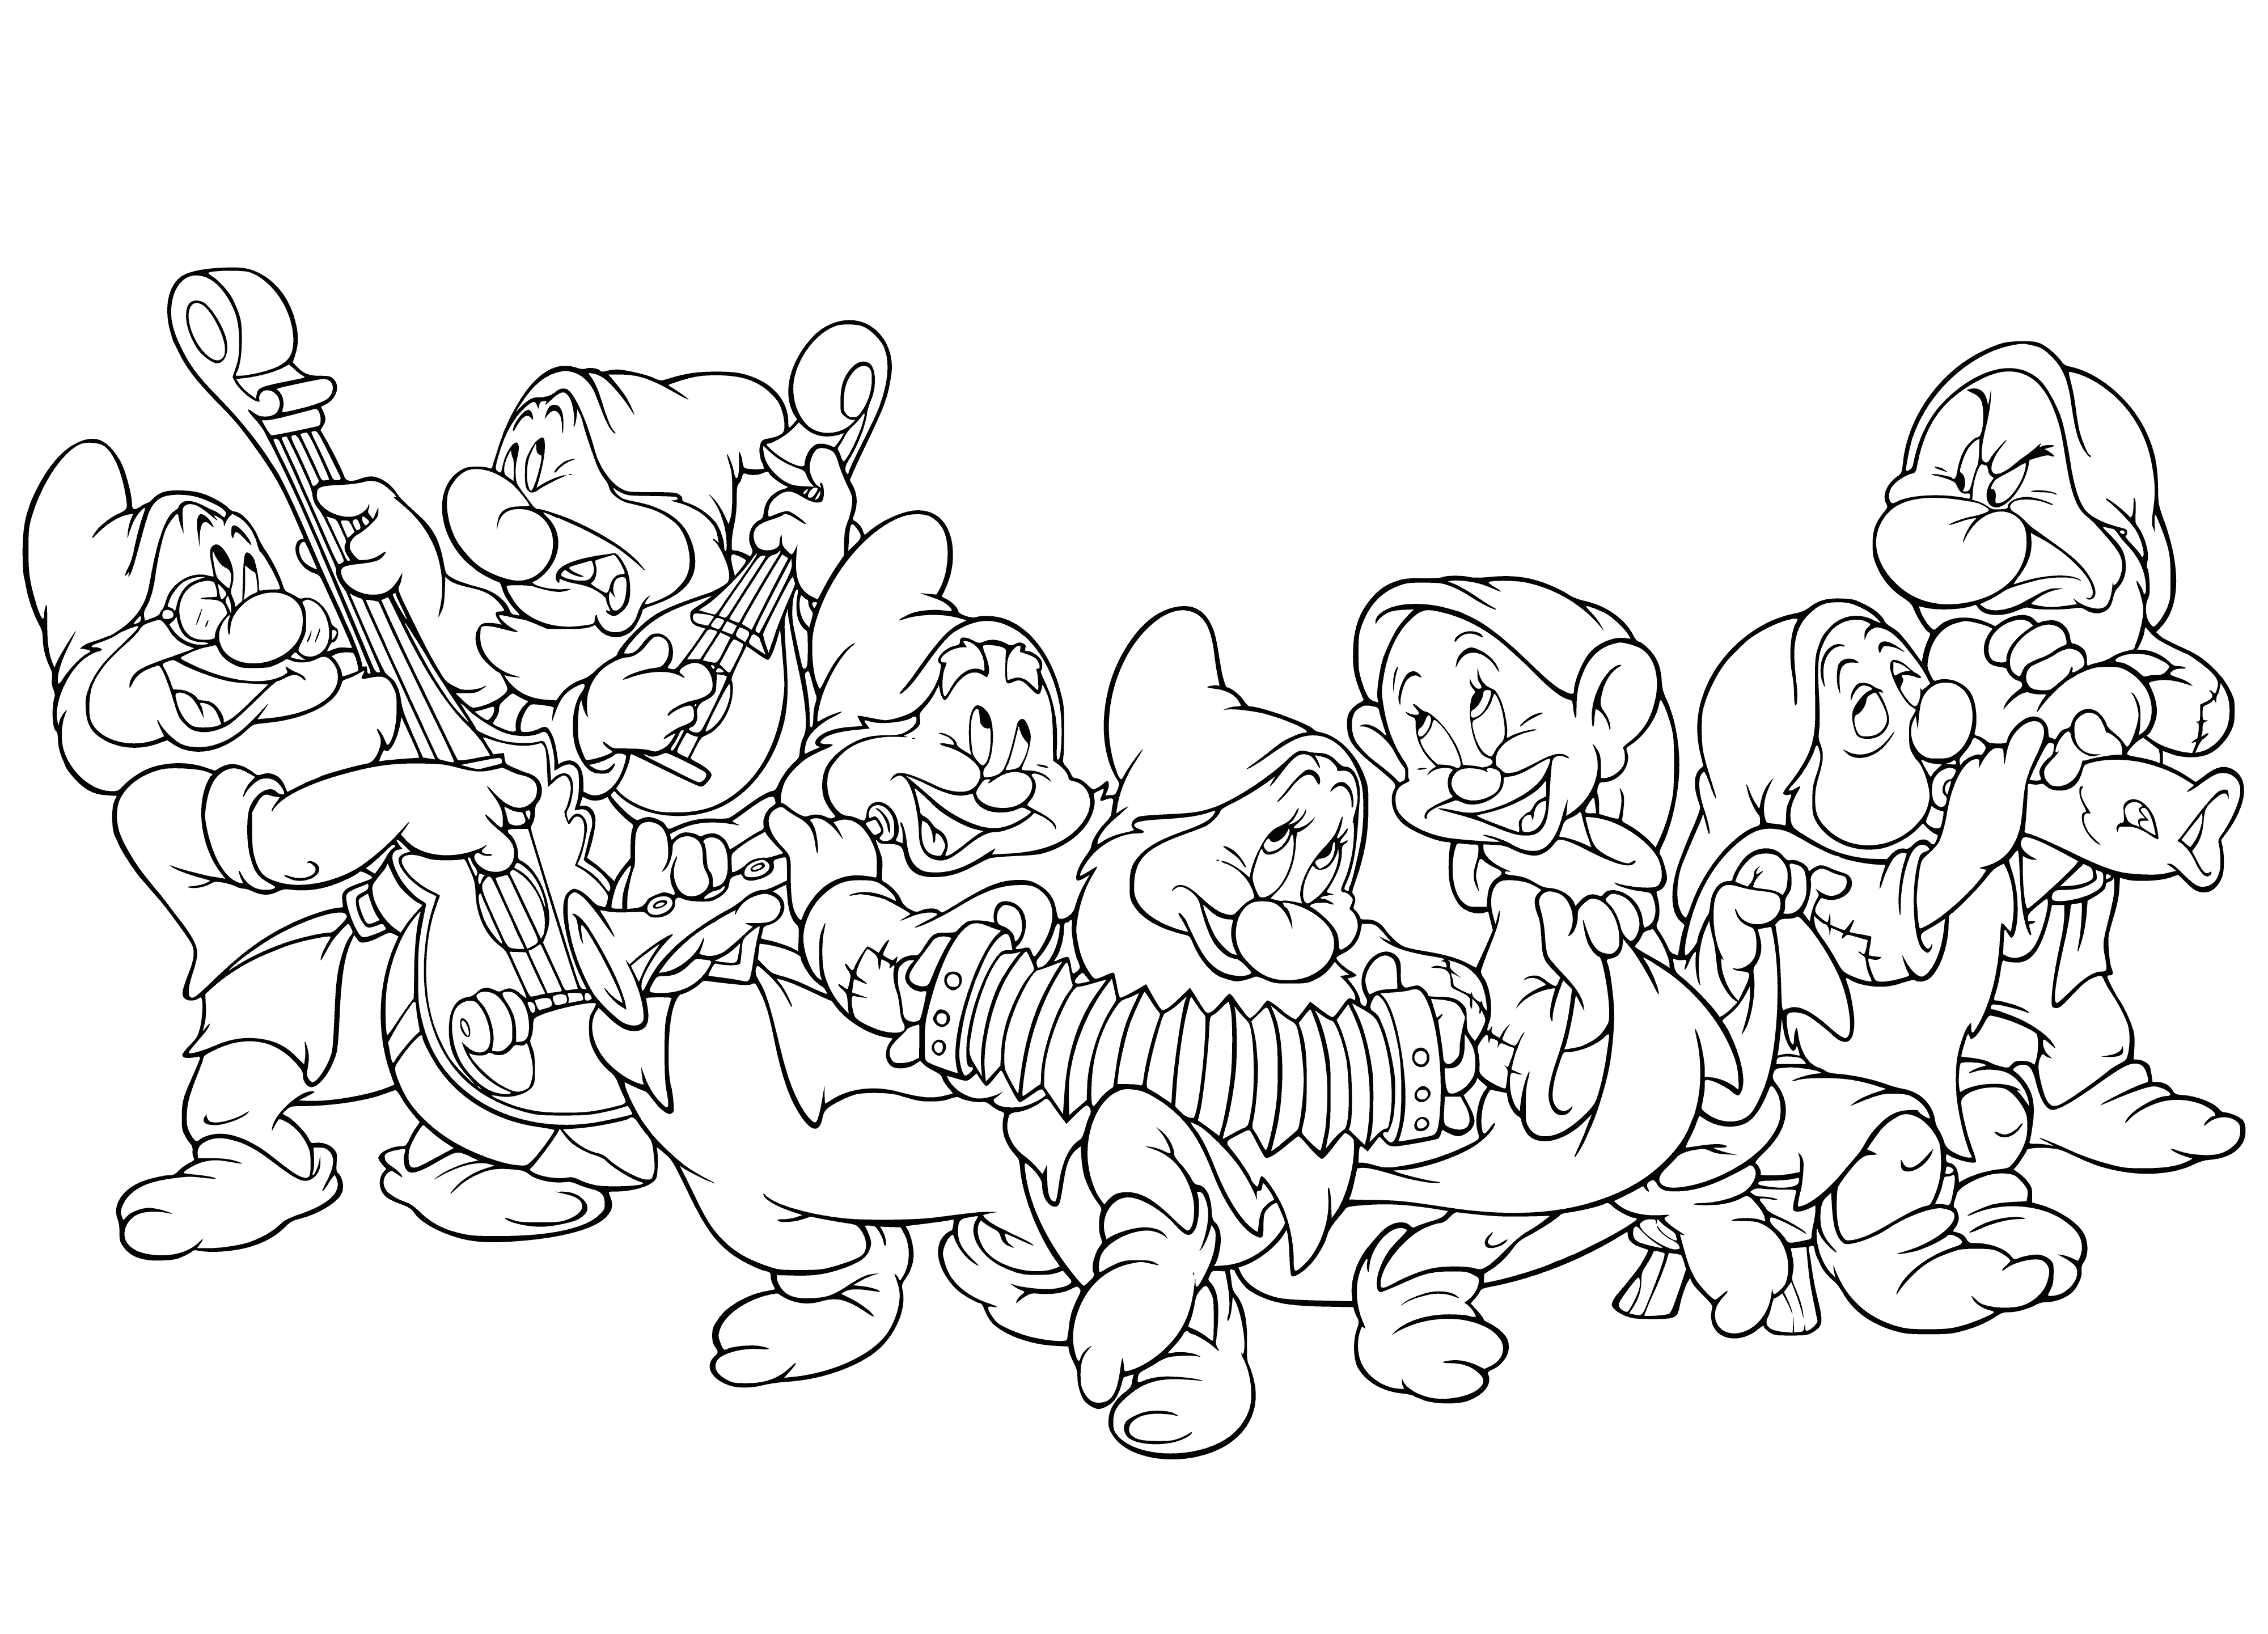 coloring page: The coloring page depicts seven dwarfs enjoying a variety of activities, such as playing games and laughing.